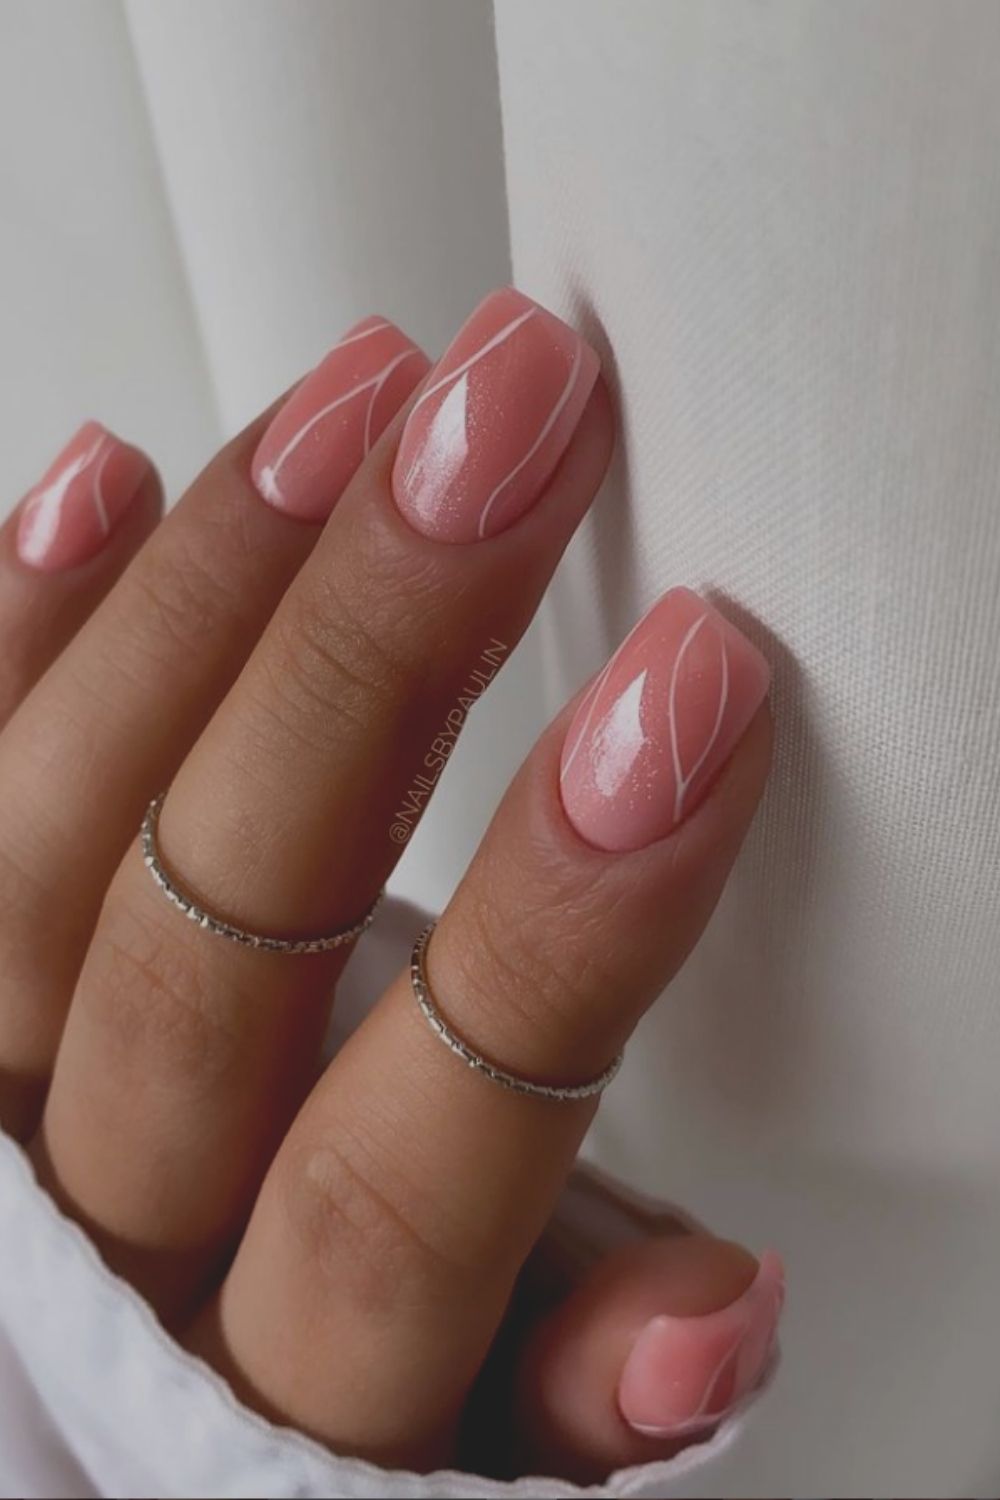 Simple nails